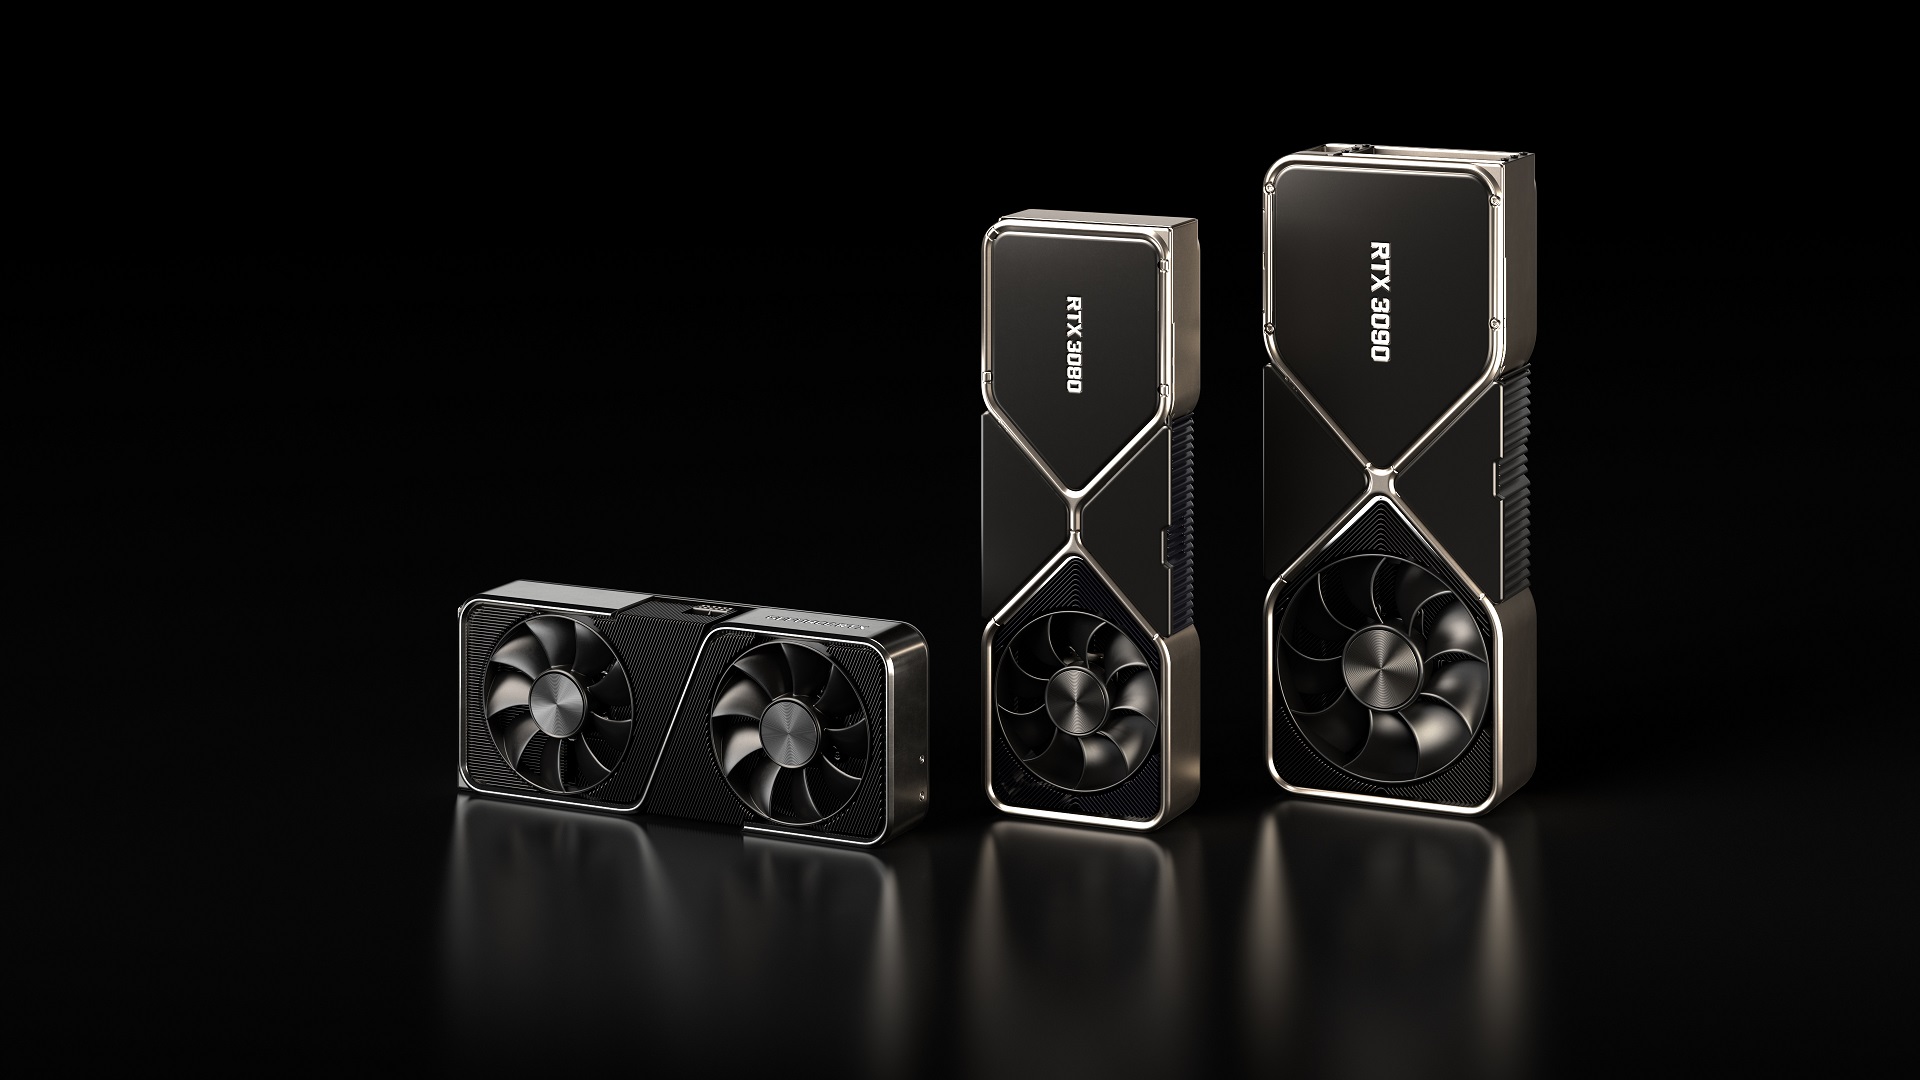 Three Nvidia graphics cards lined up in front of a reflective black background